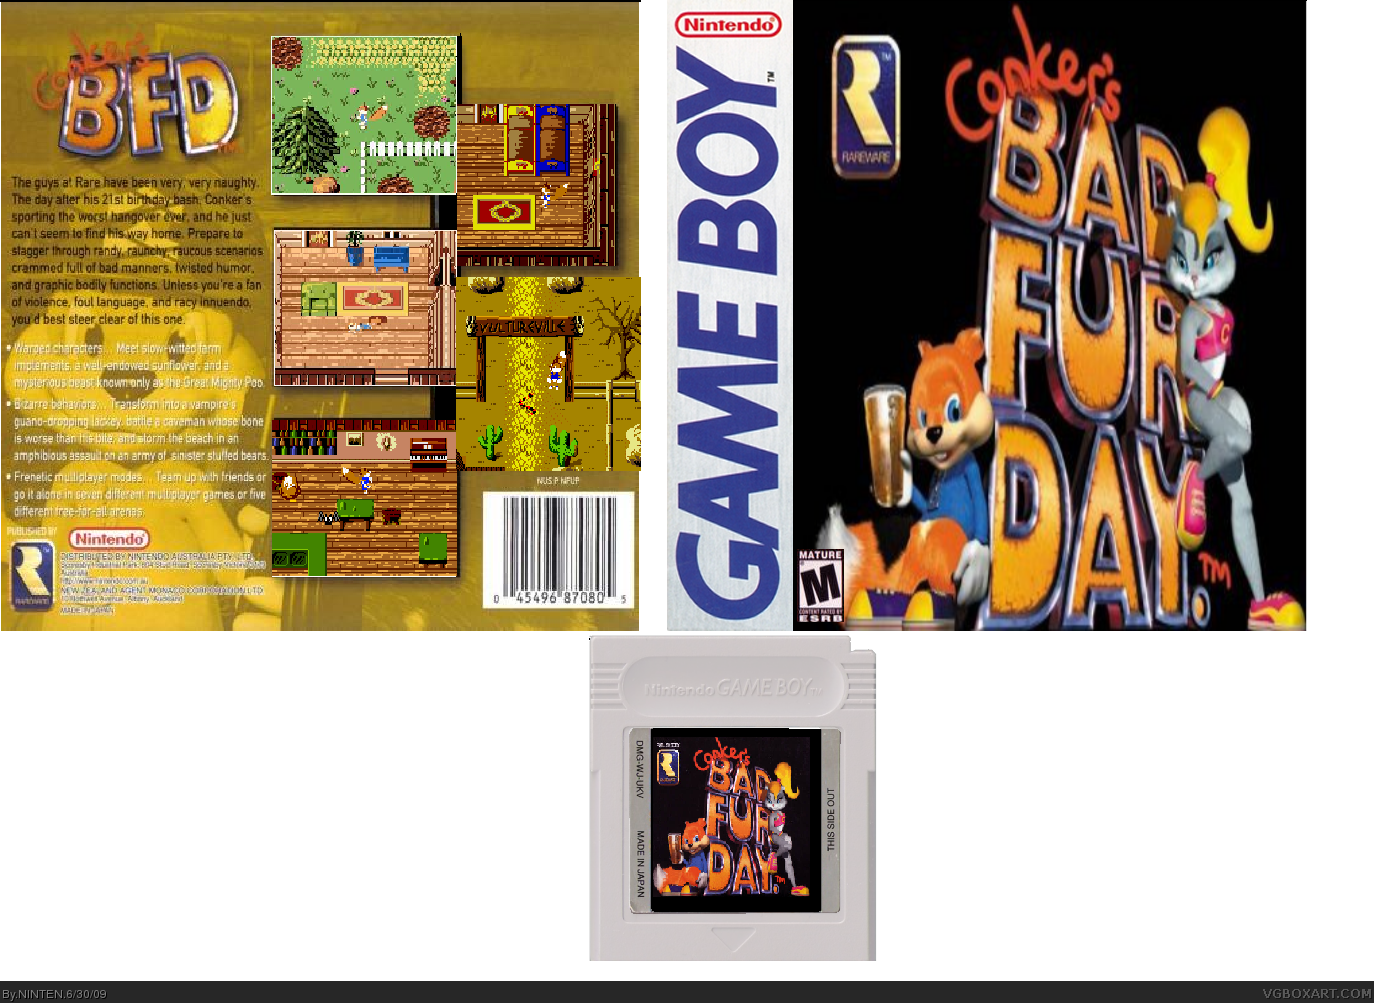 Conker's Bad Fur Day box cover